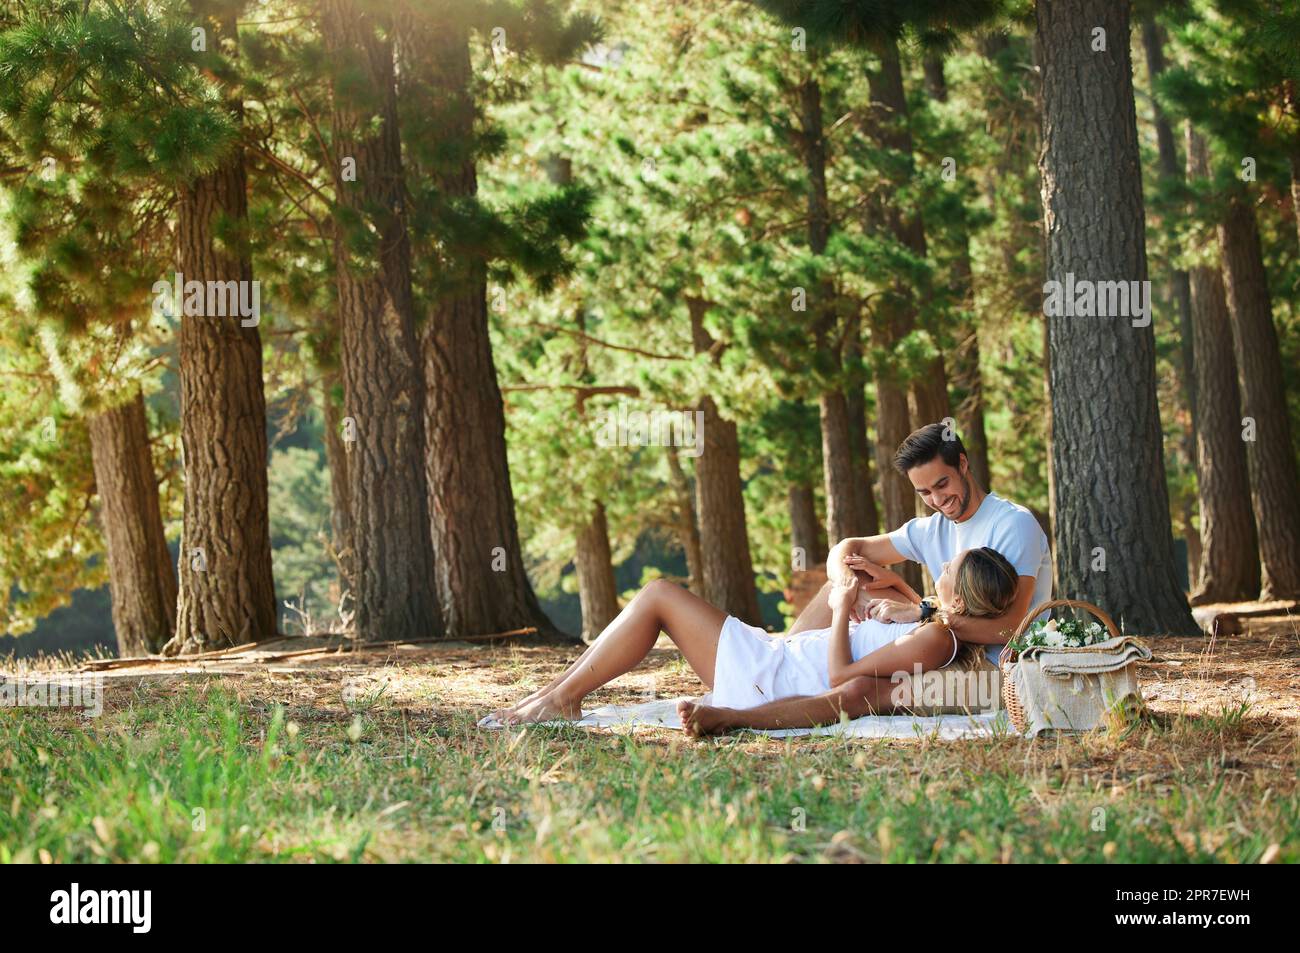 A picnic in the forest restores everything. Shot of a young couple having a picnic in the forest. Stock Photo